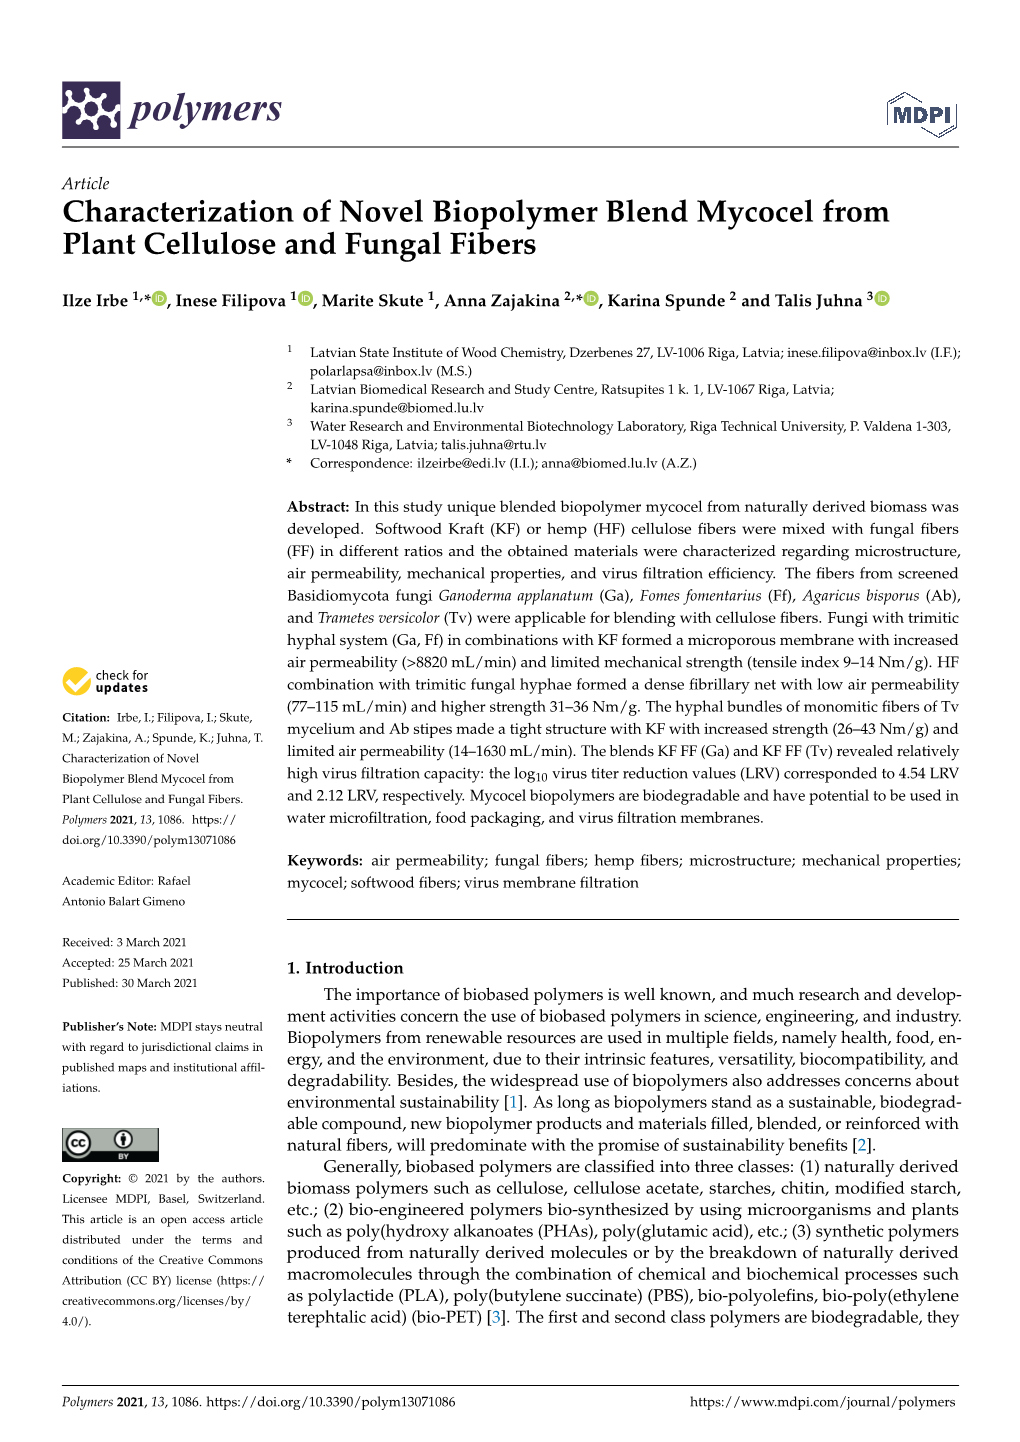 Characterization of Novel Biopolymer Blend Mycocel from Plant Cellulose and Fungal Fibers